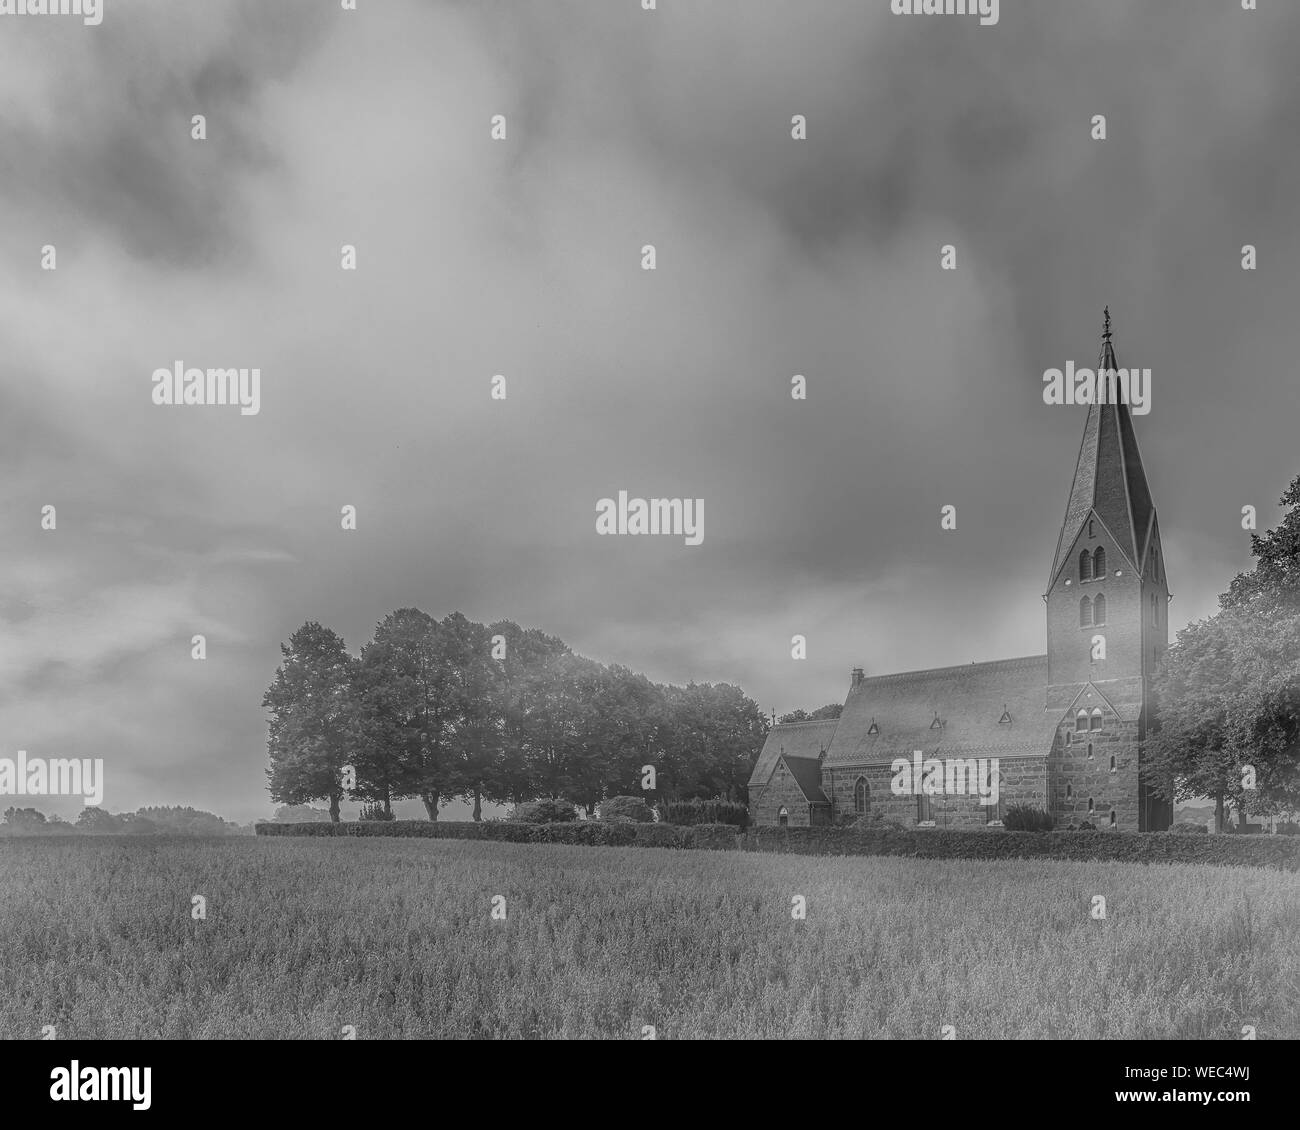 The early morning fog starts to clear at Sonnarslov church in the Skane region of Sweden. Stock Photo